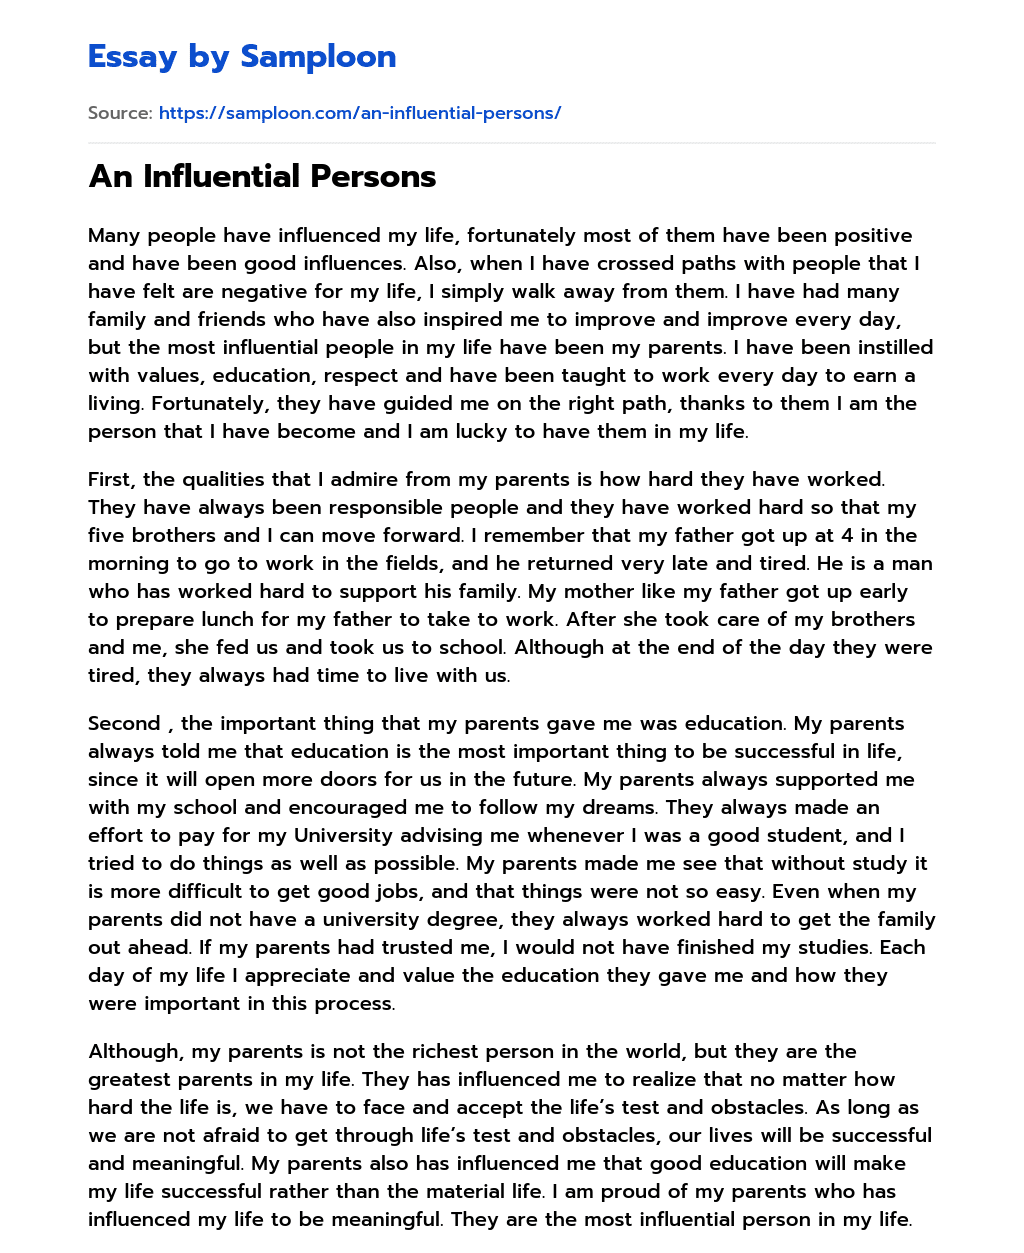 An Influential Persons essay